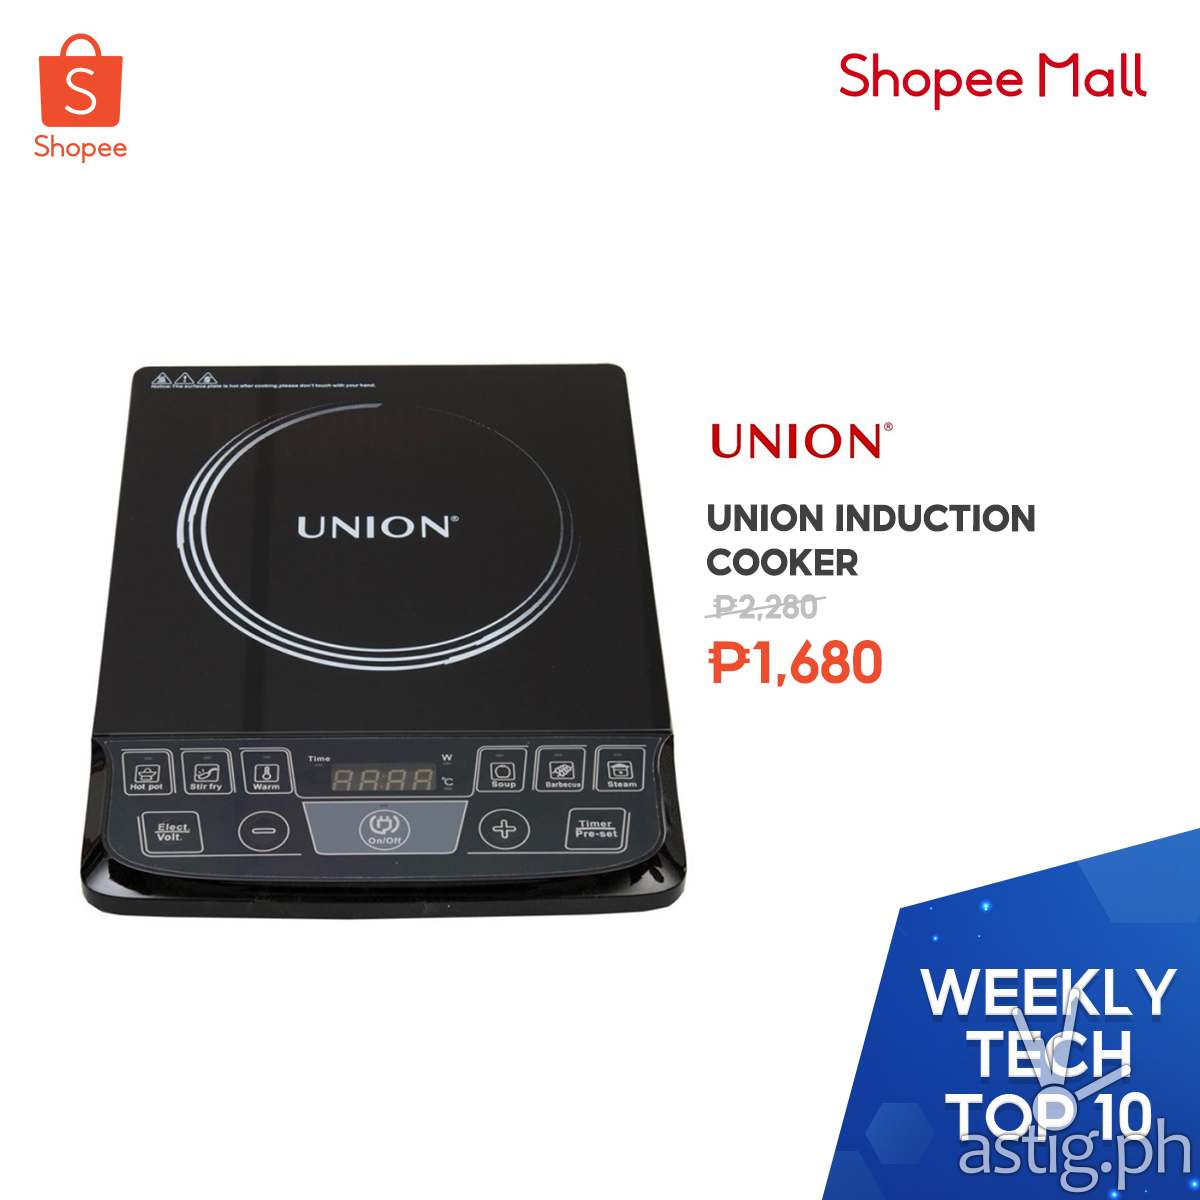 Union Induction Cooker